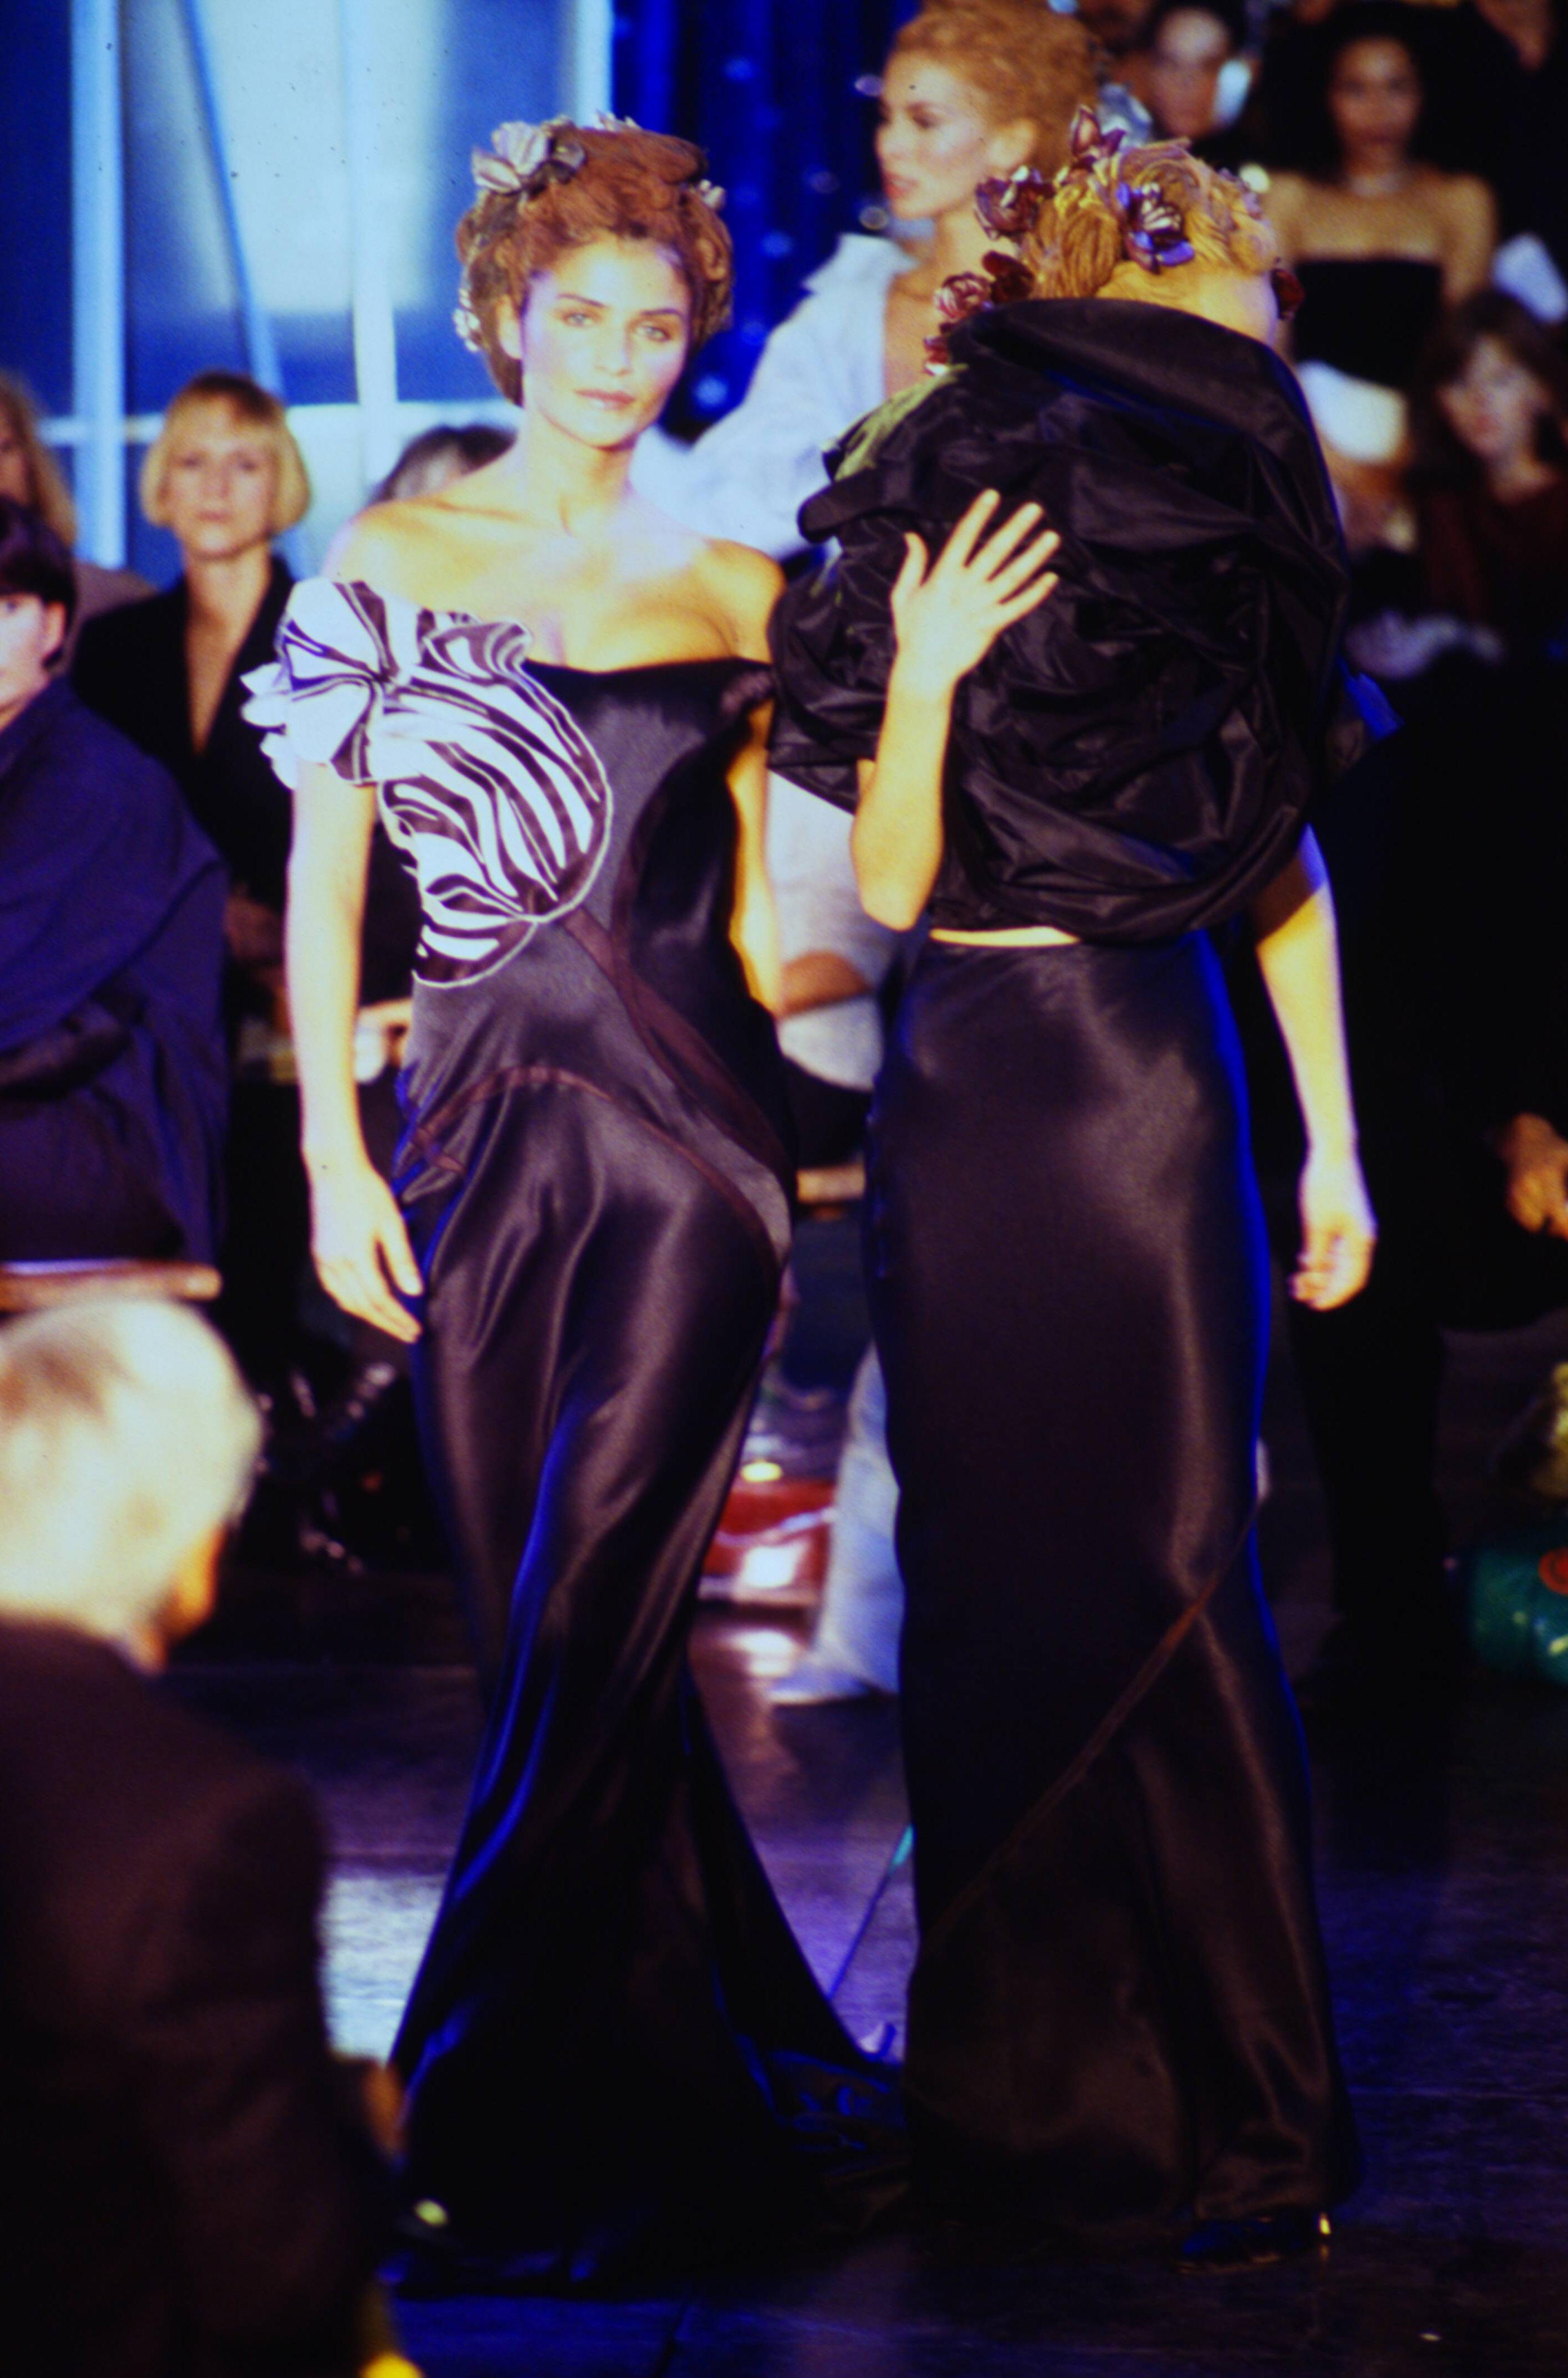 S/S 1996 John Galliano black and white sculptural sleeve gown with train. Off-shoulder gown with long, full train. Black and white geometric sleeve and bust asymmetrical detail, with subtle flower motif. Deep purple curved contrasting paneling